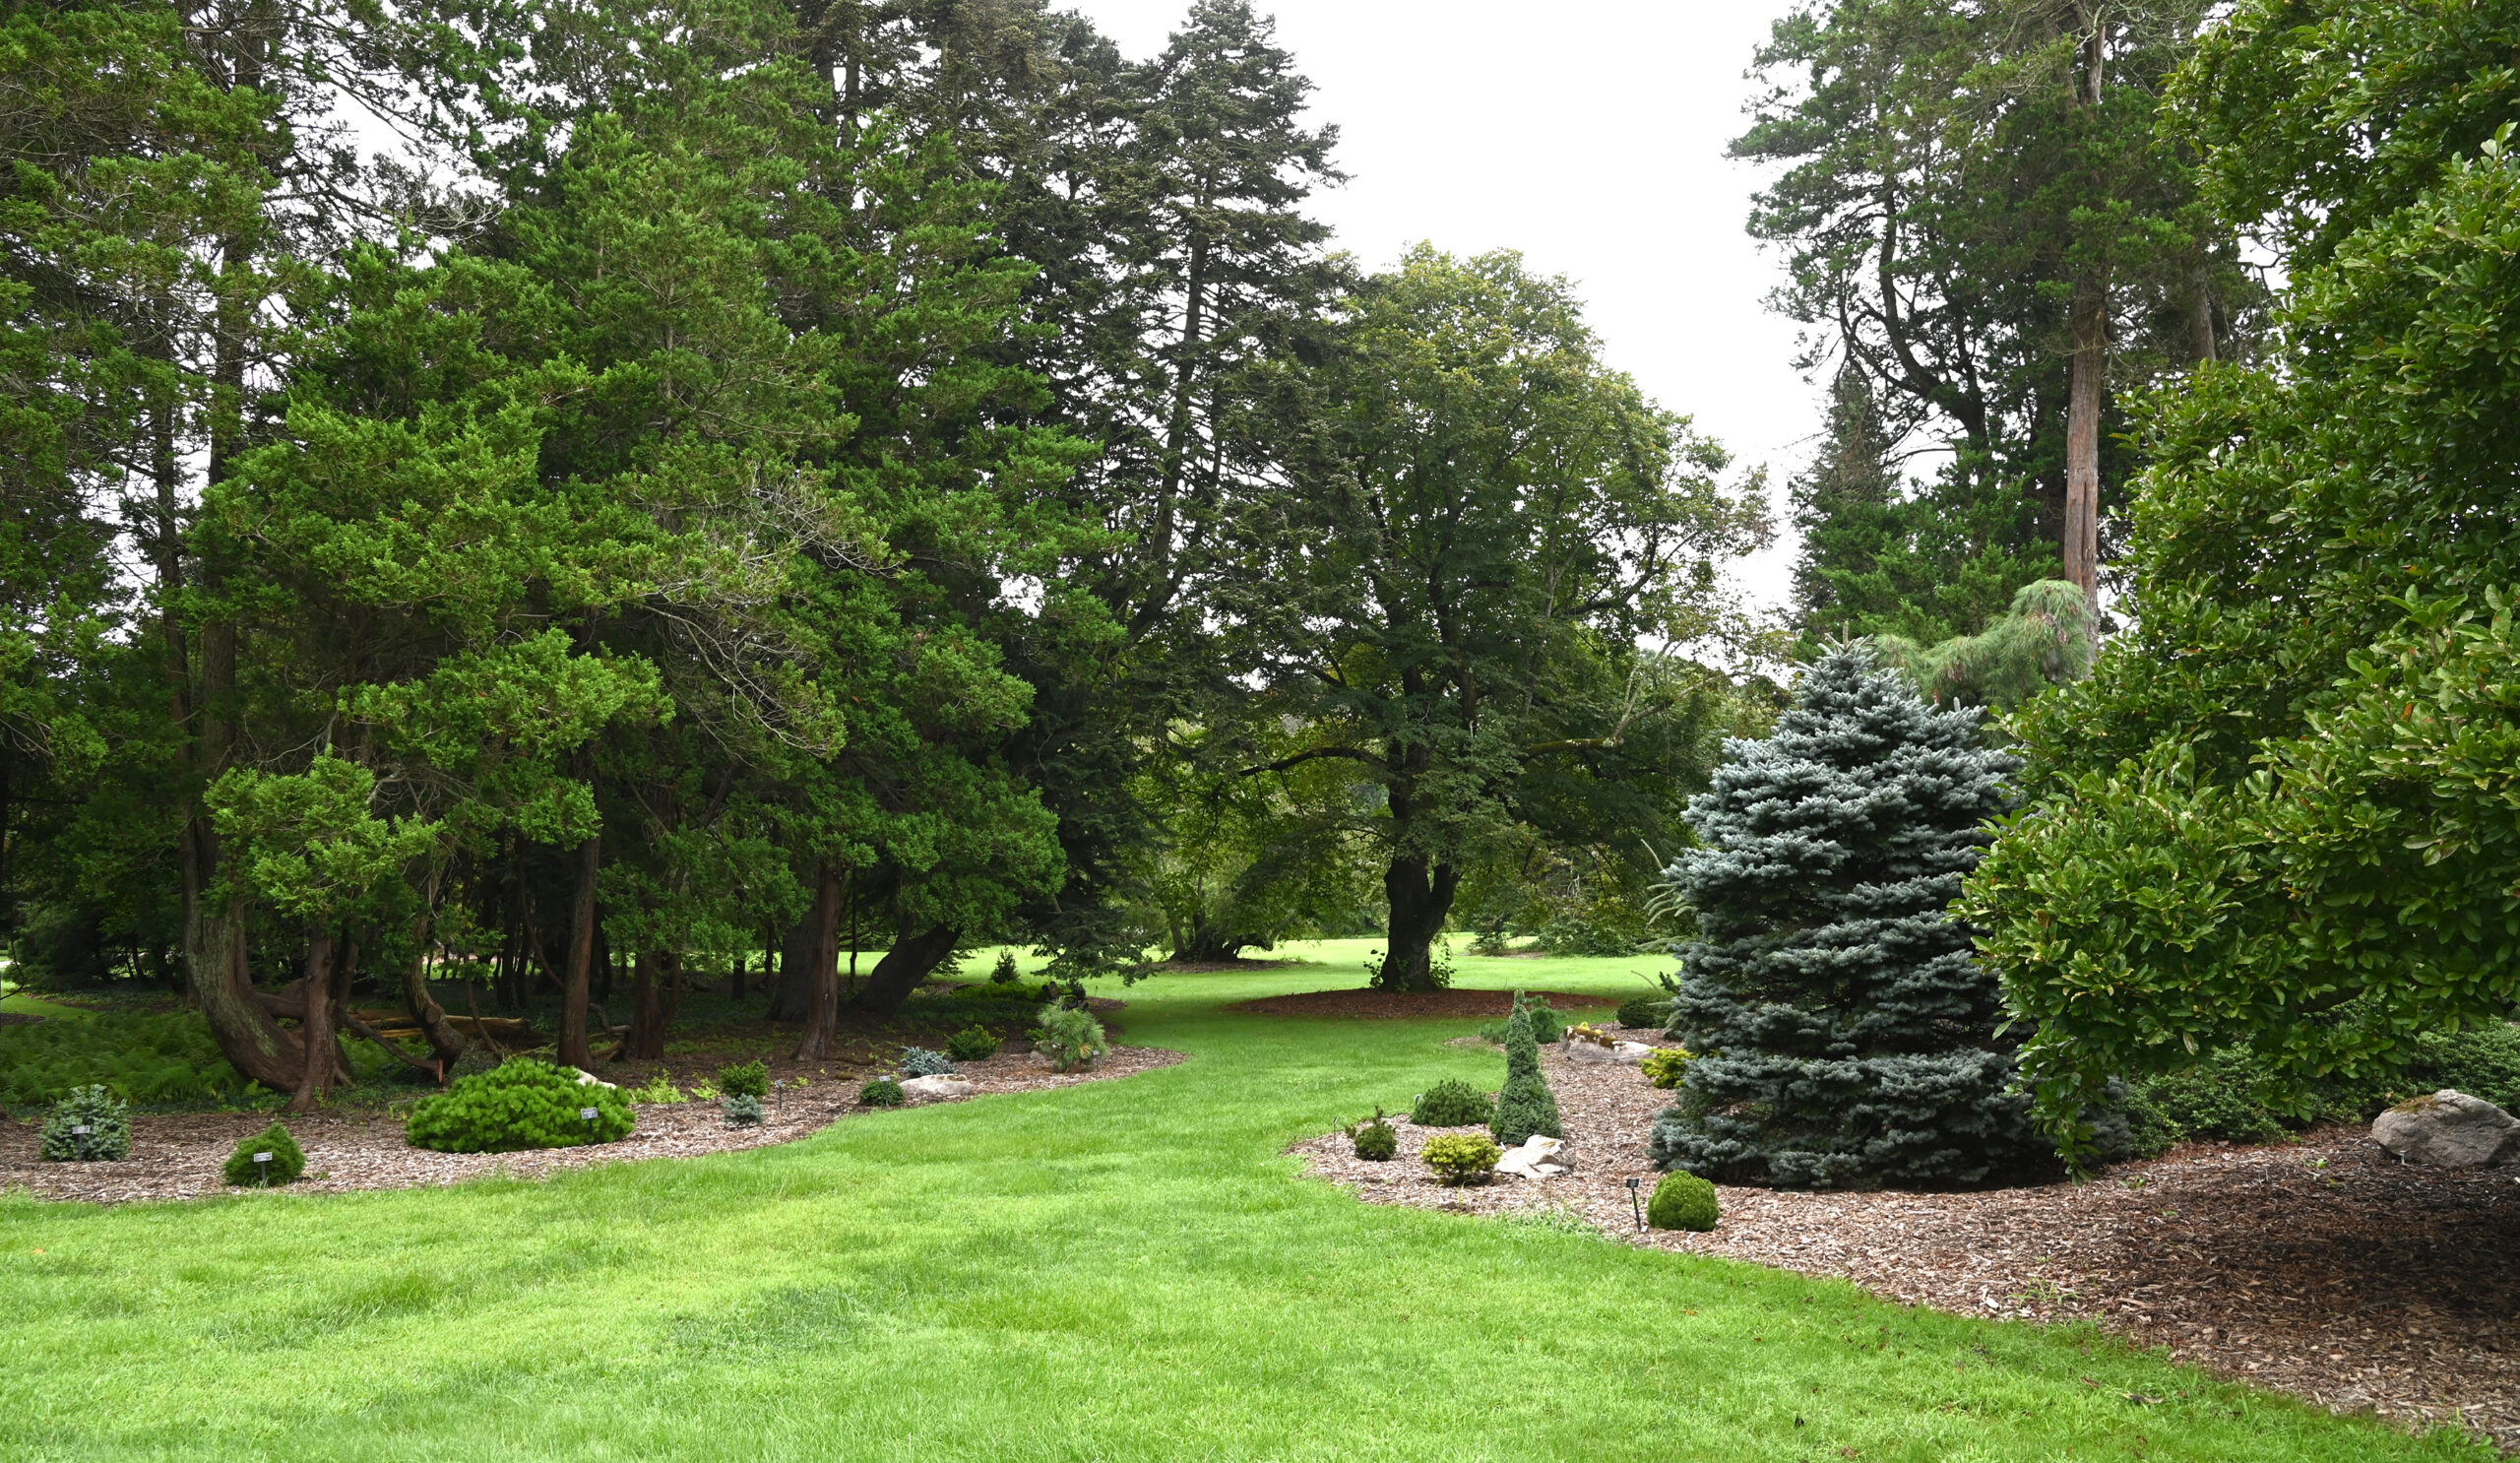 Photograph of the ACS garden in the summer. Lush green grass surrounded by short and tall conifers.